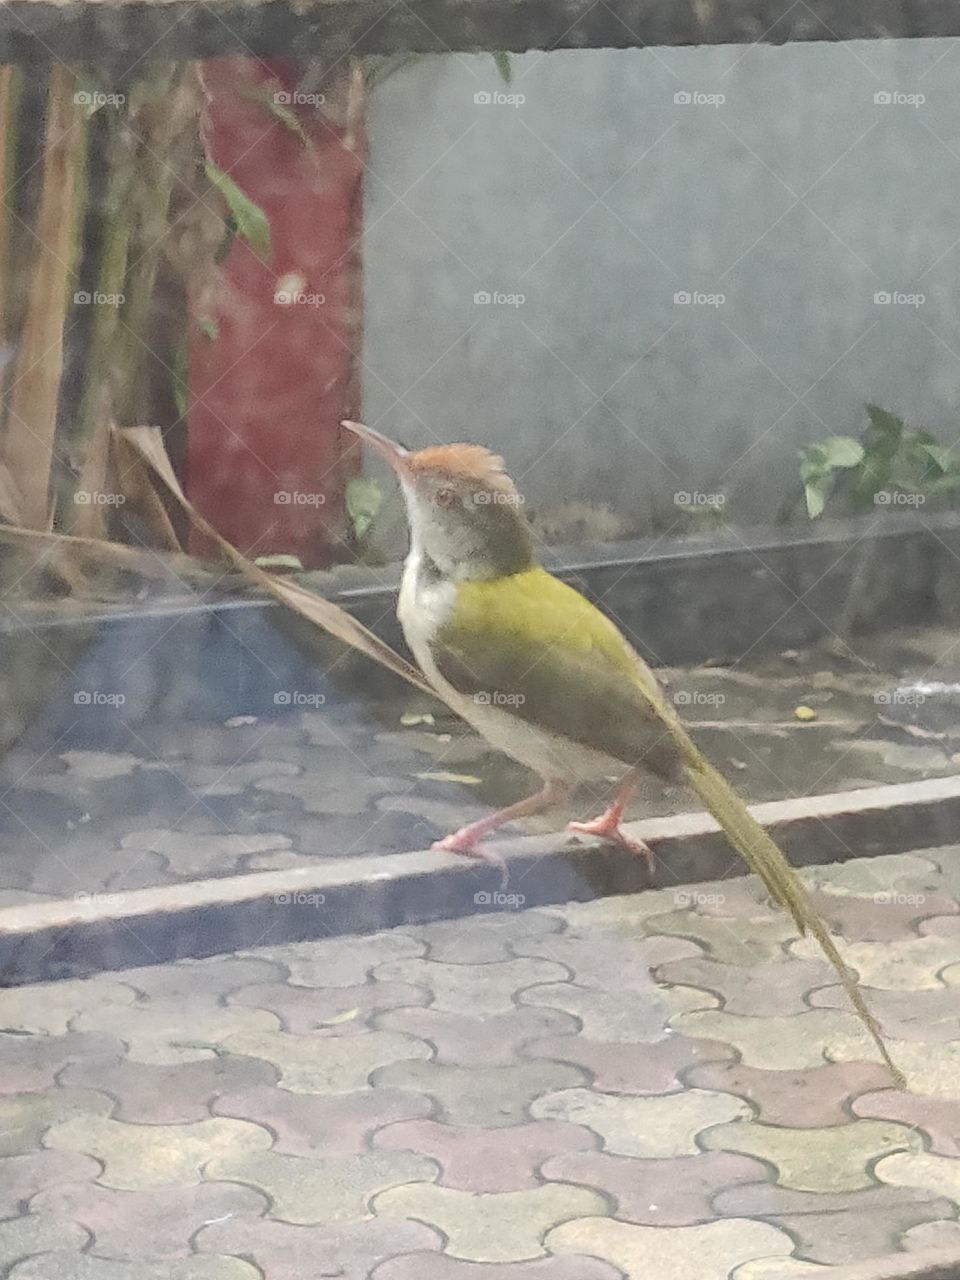 Cute little bird, generally called as Tailor Bird, visible in western part of India.